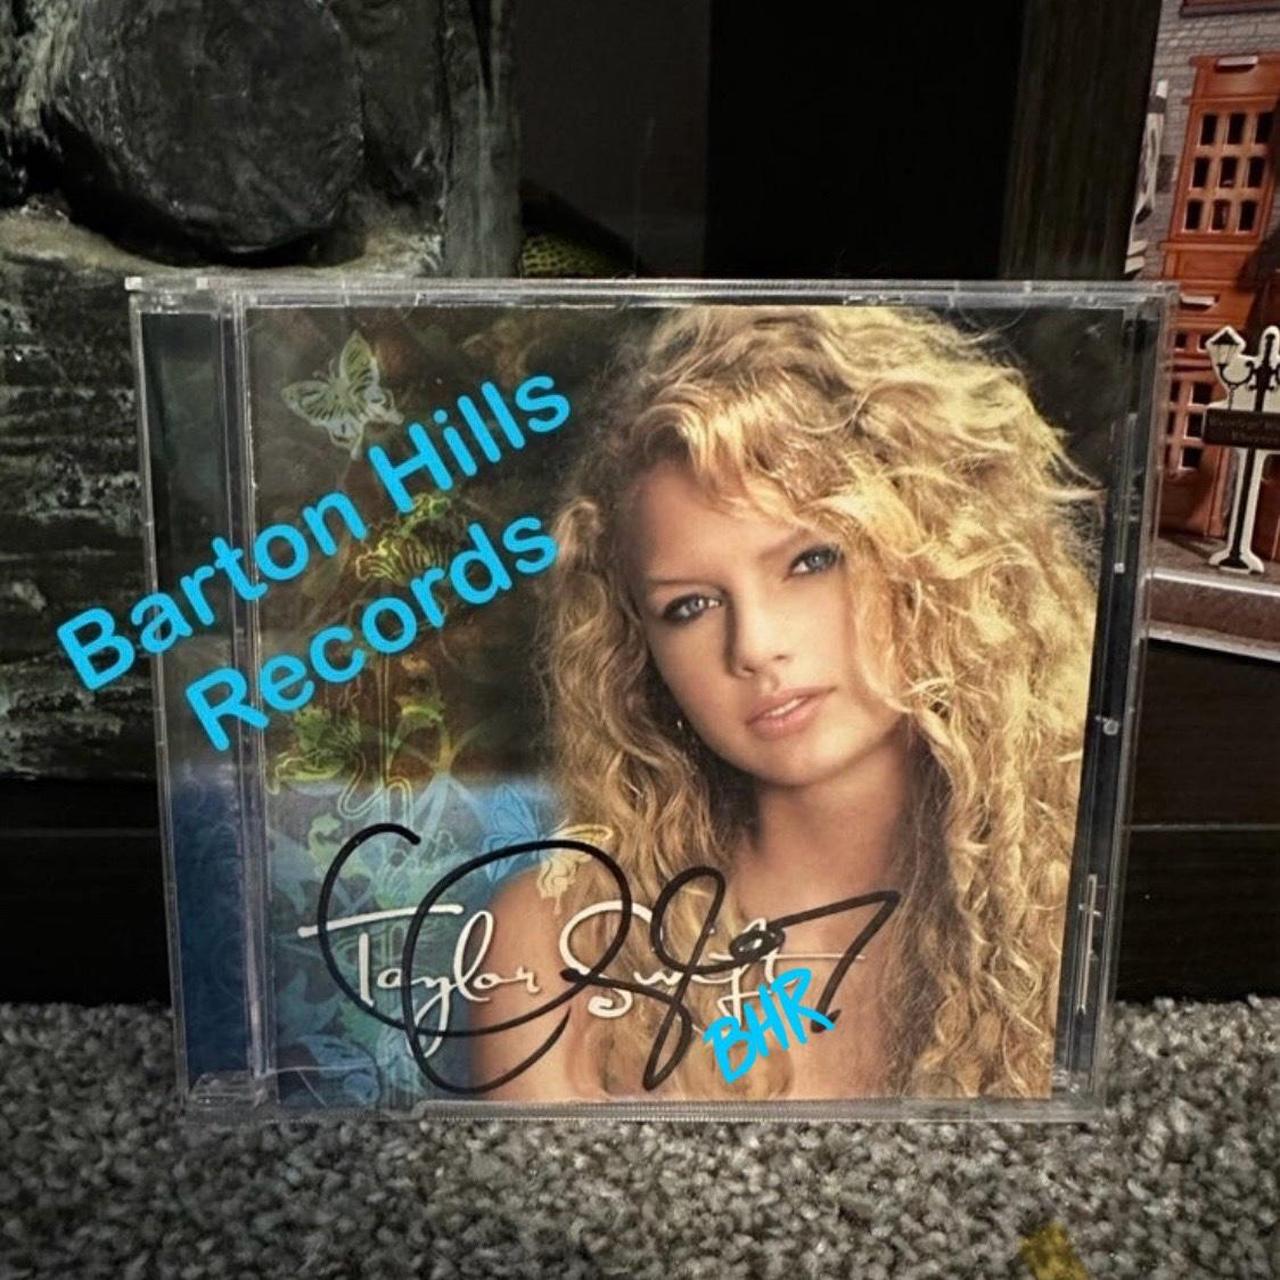 Taylor Swift Signed Debut CD Taylor Swift